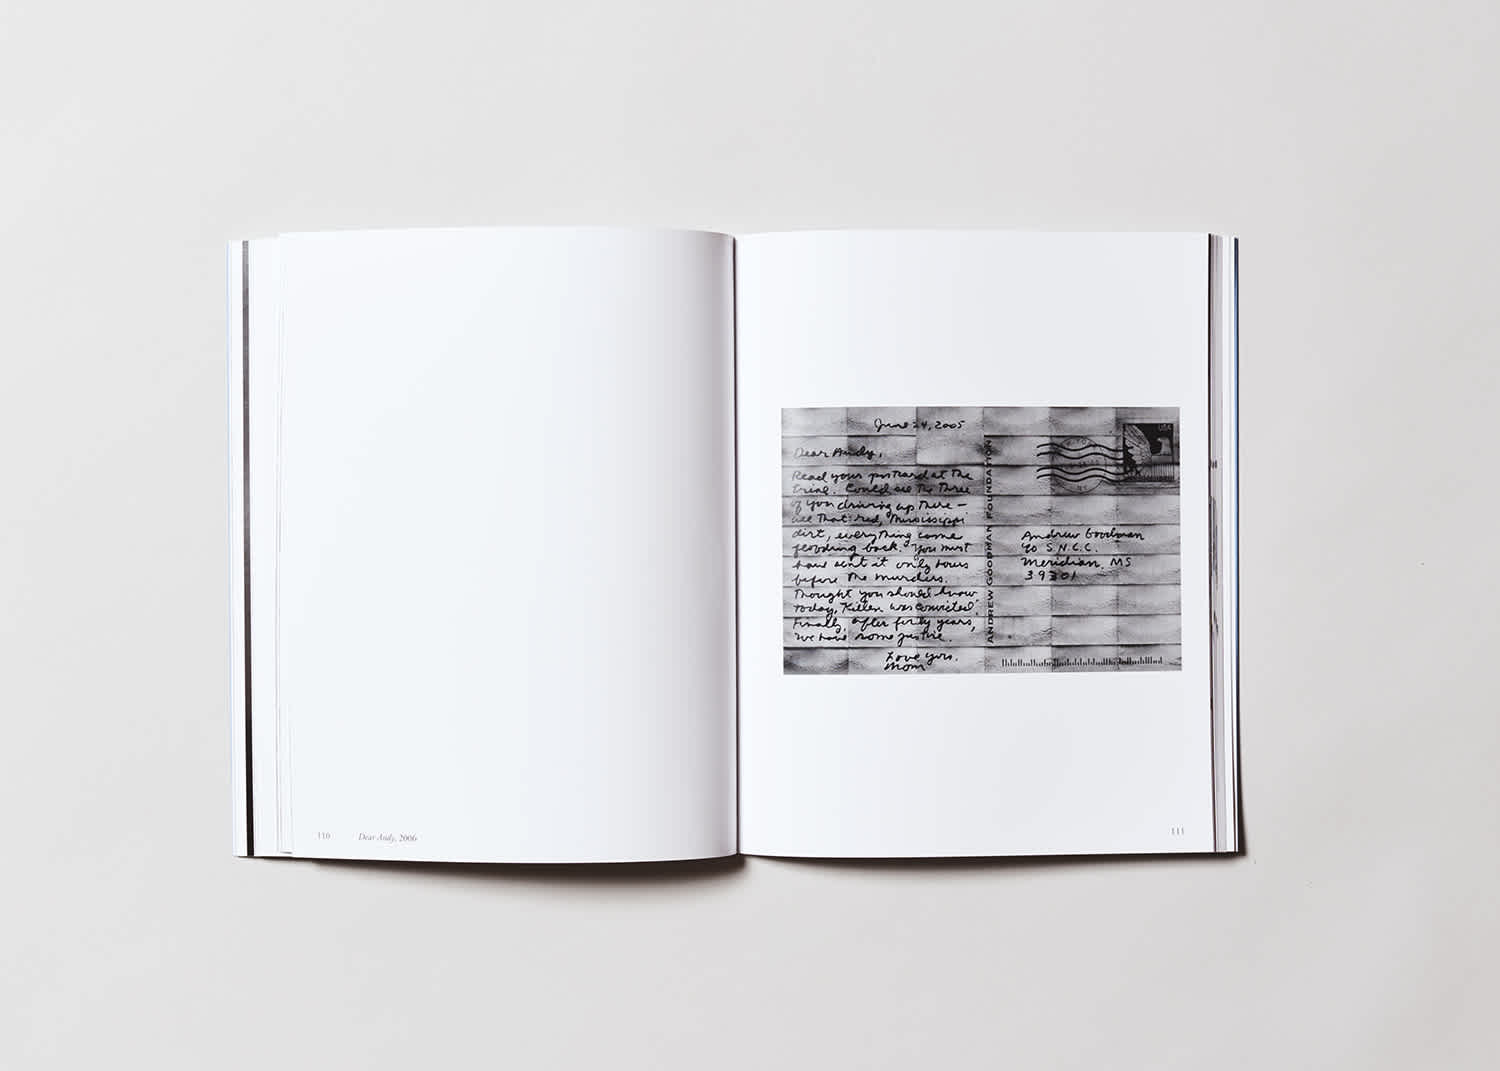 Book interior. The left page is blank, the right page has a black and white artwork by the artist Mary Kelly.